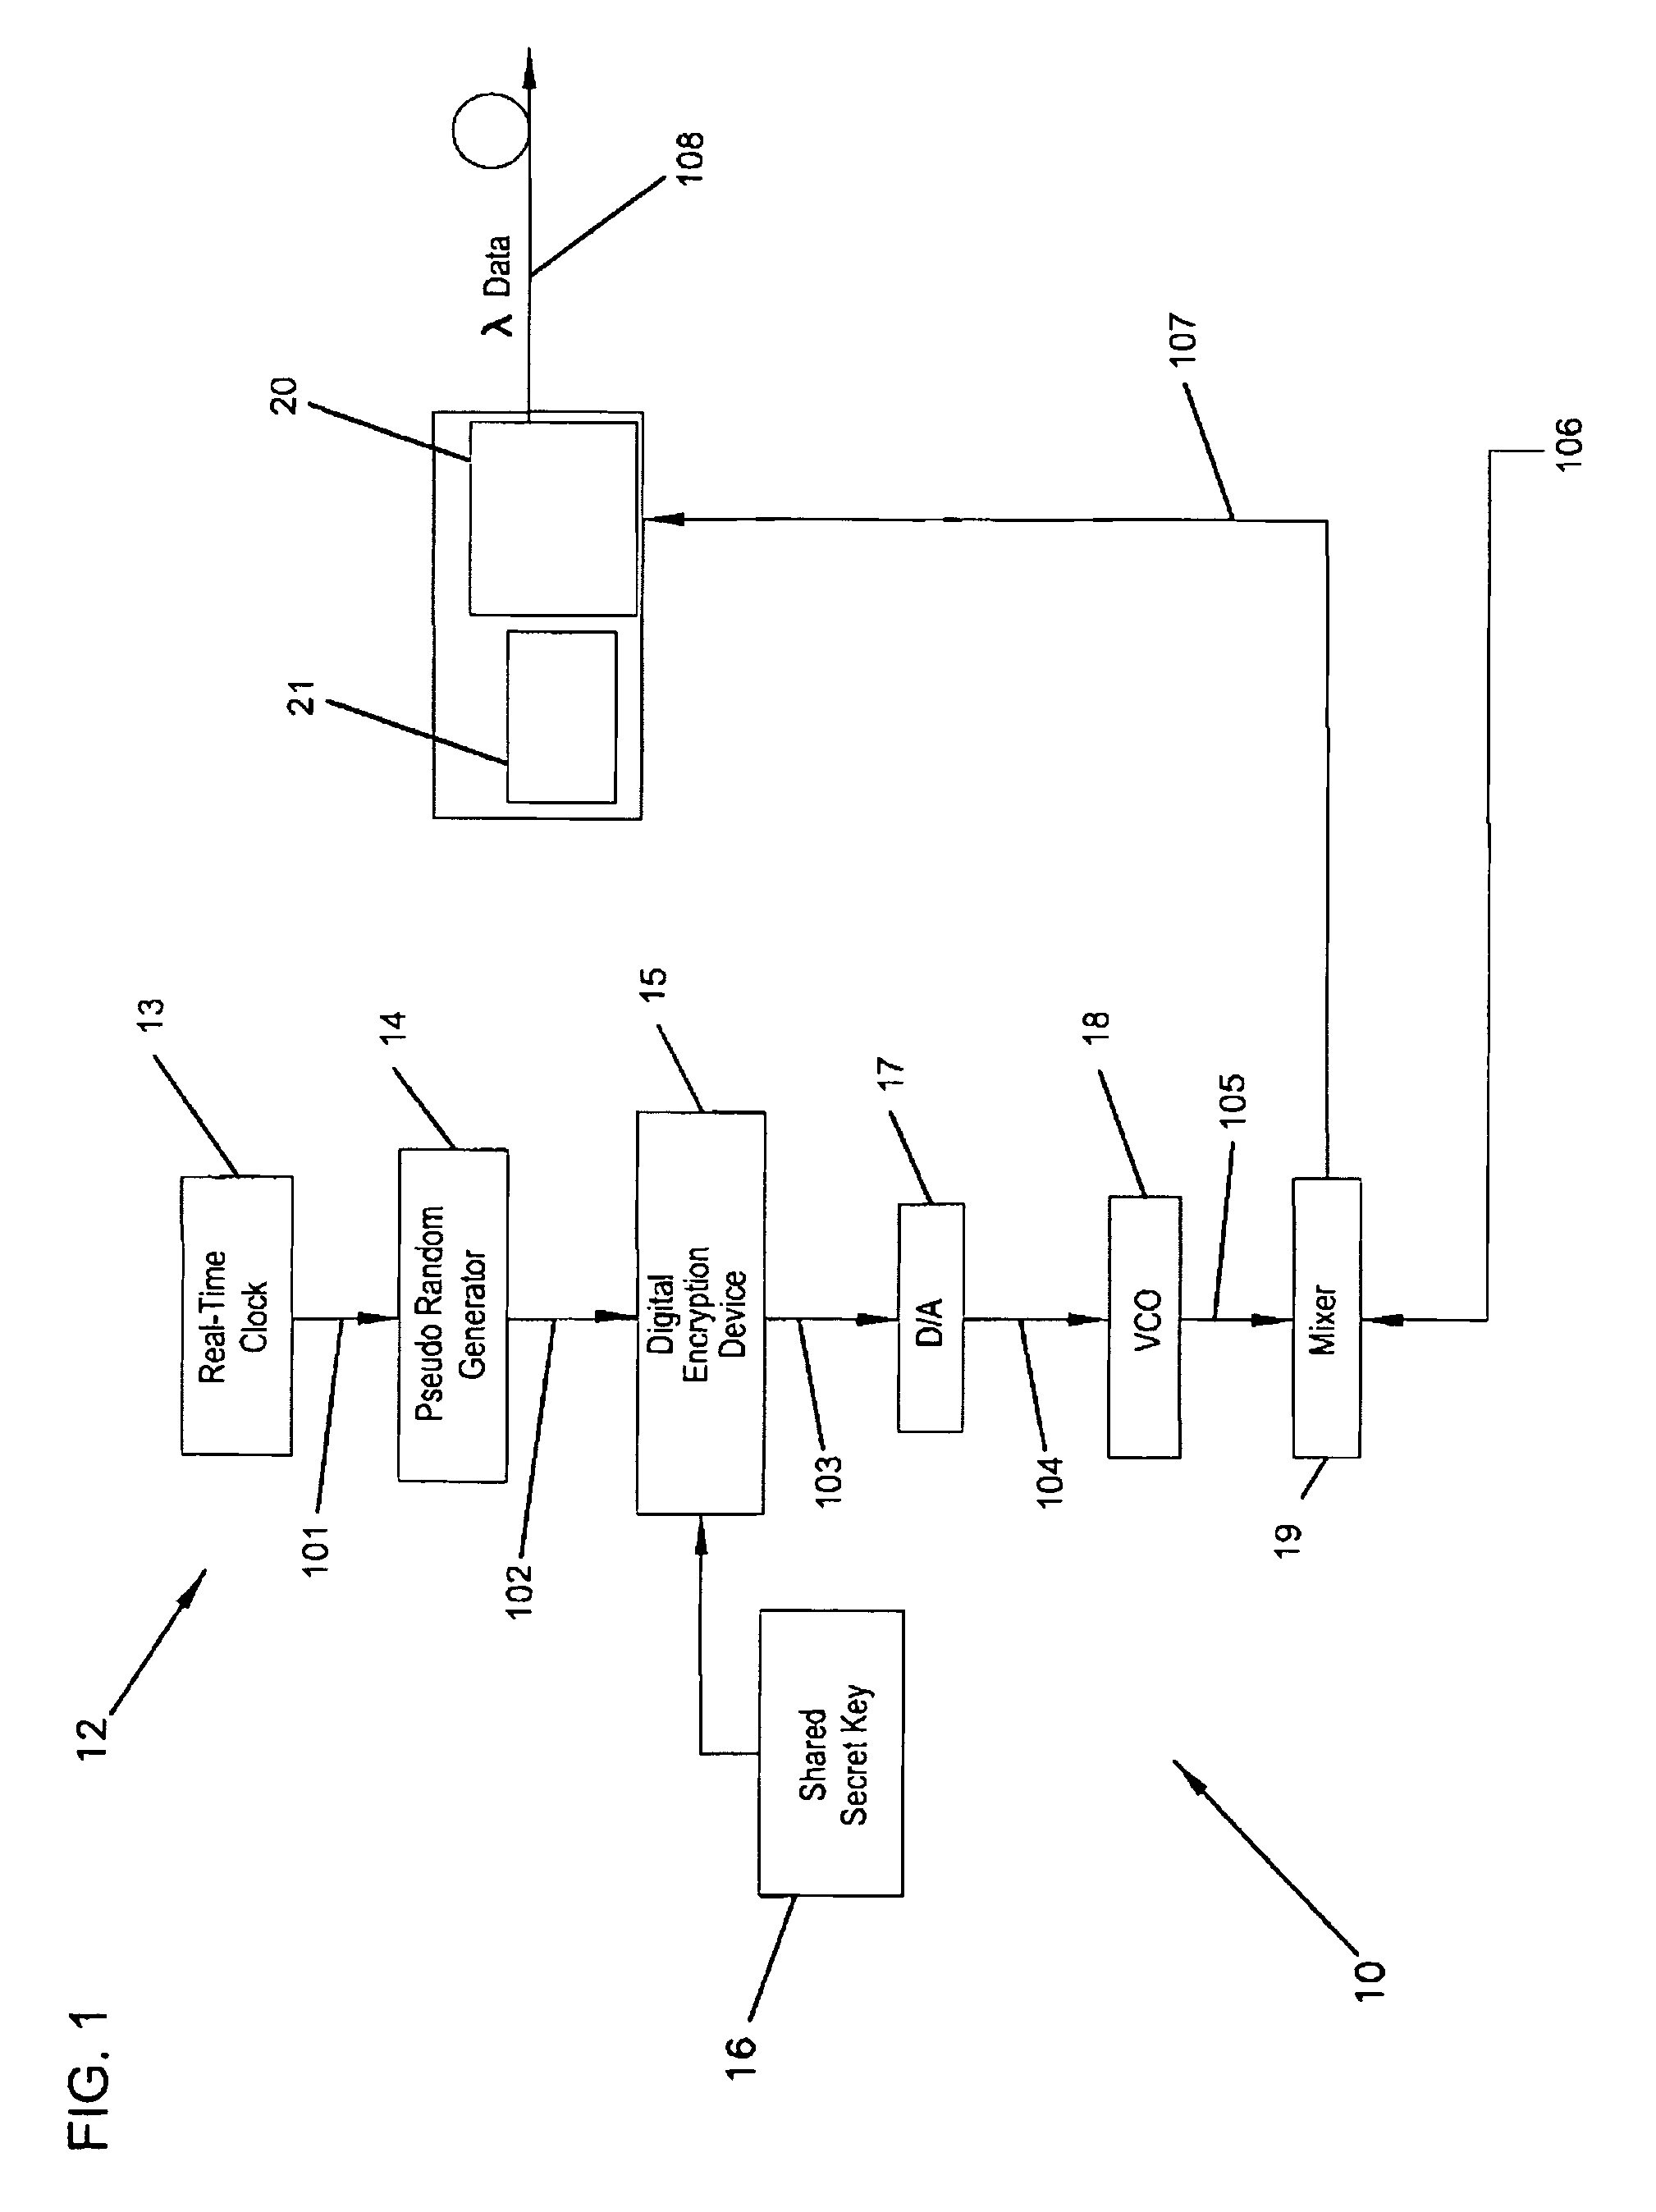 Encryption for optical communications using dynamic subcarrier multiplexing